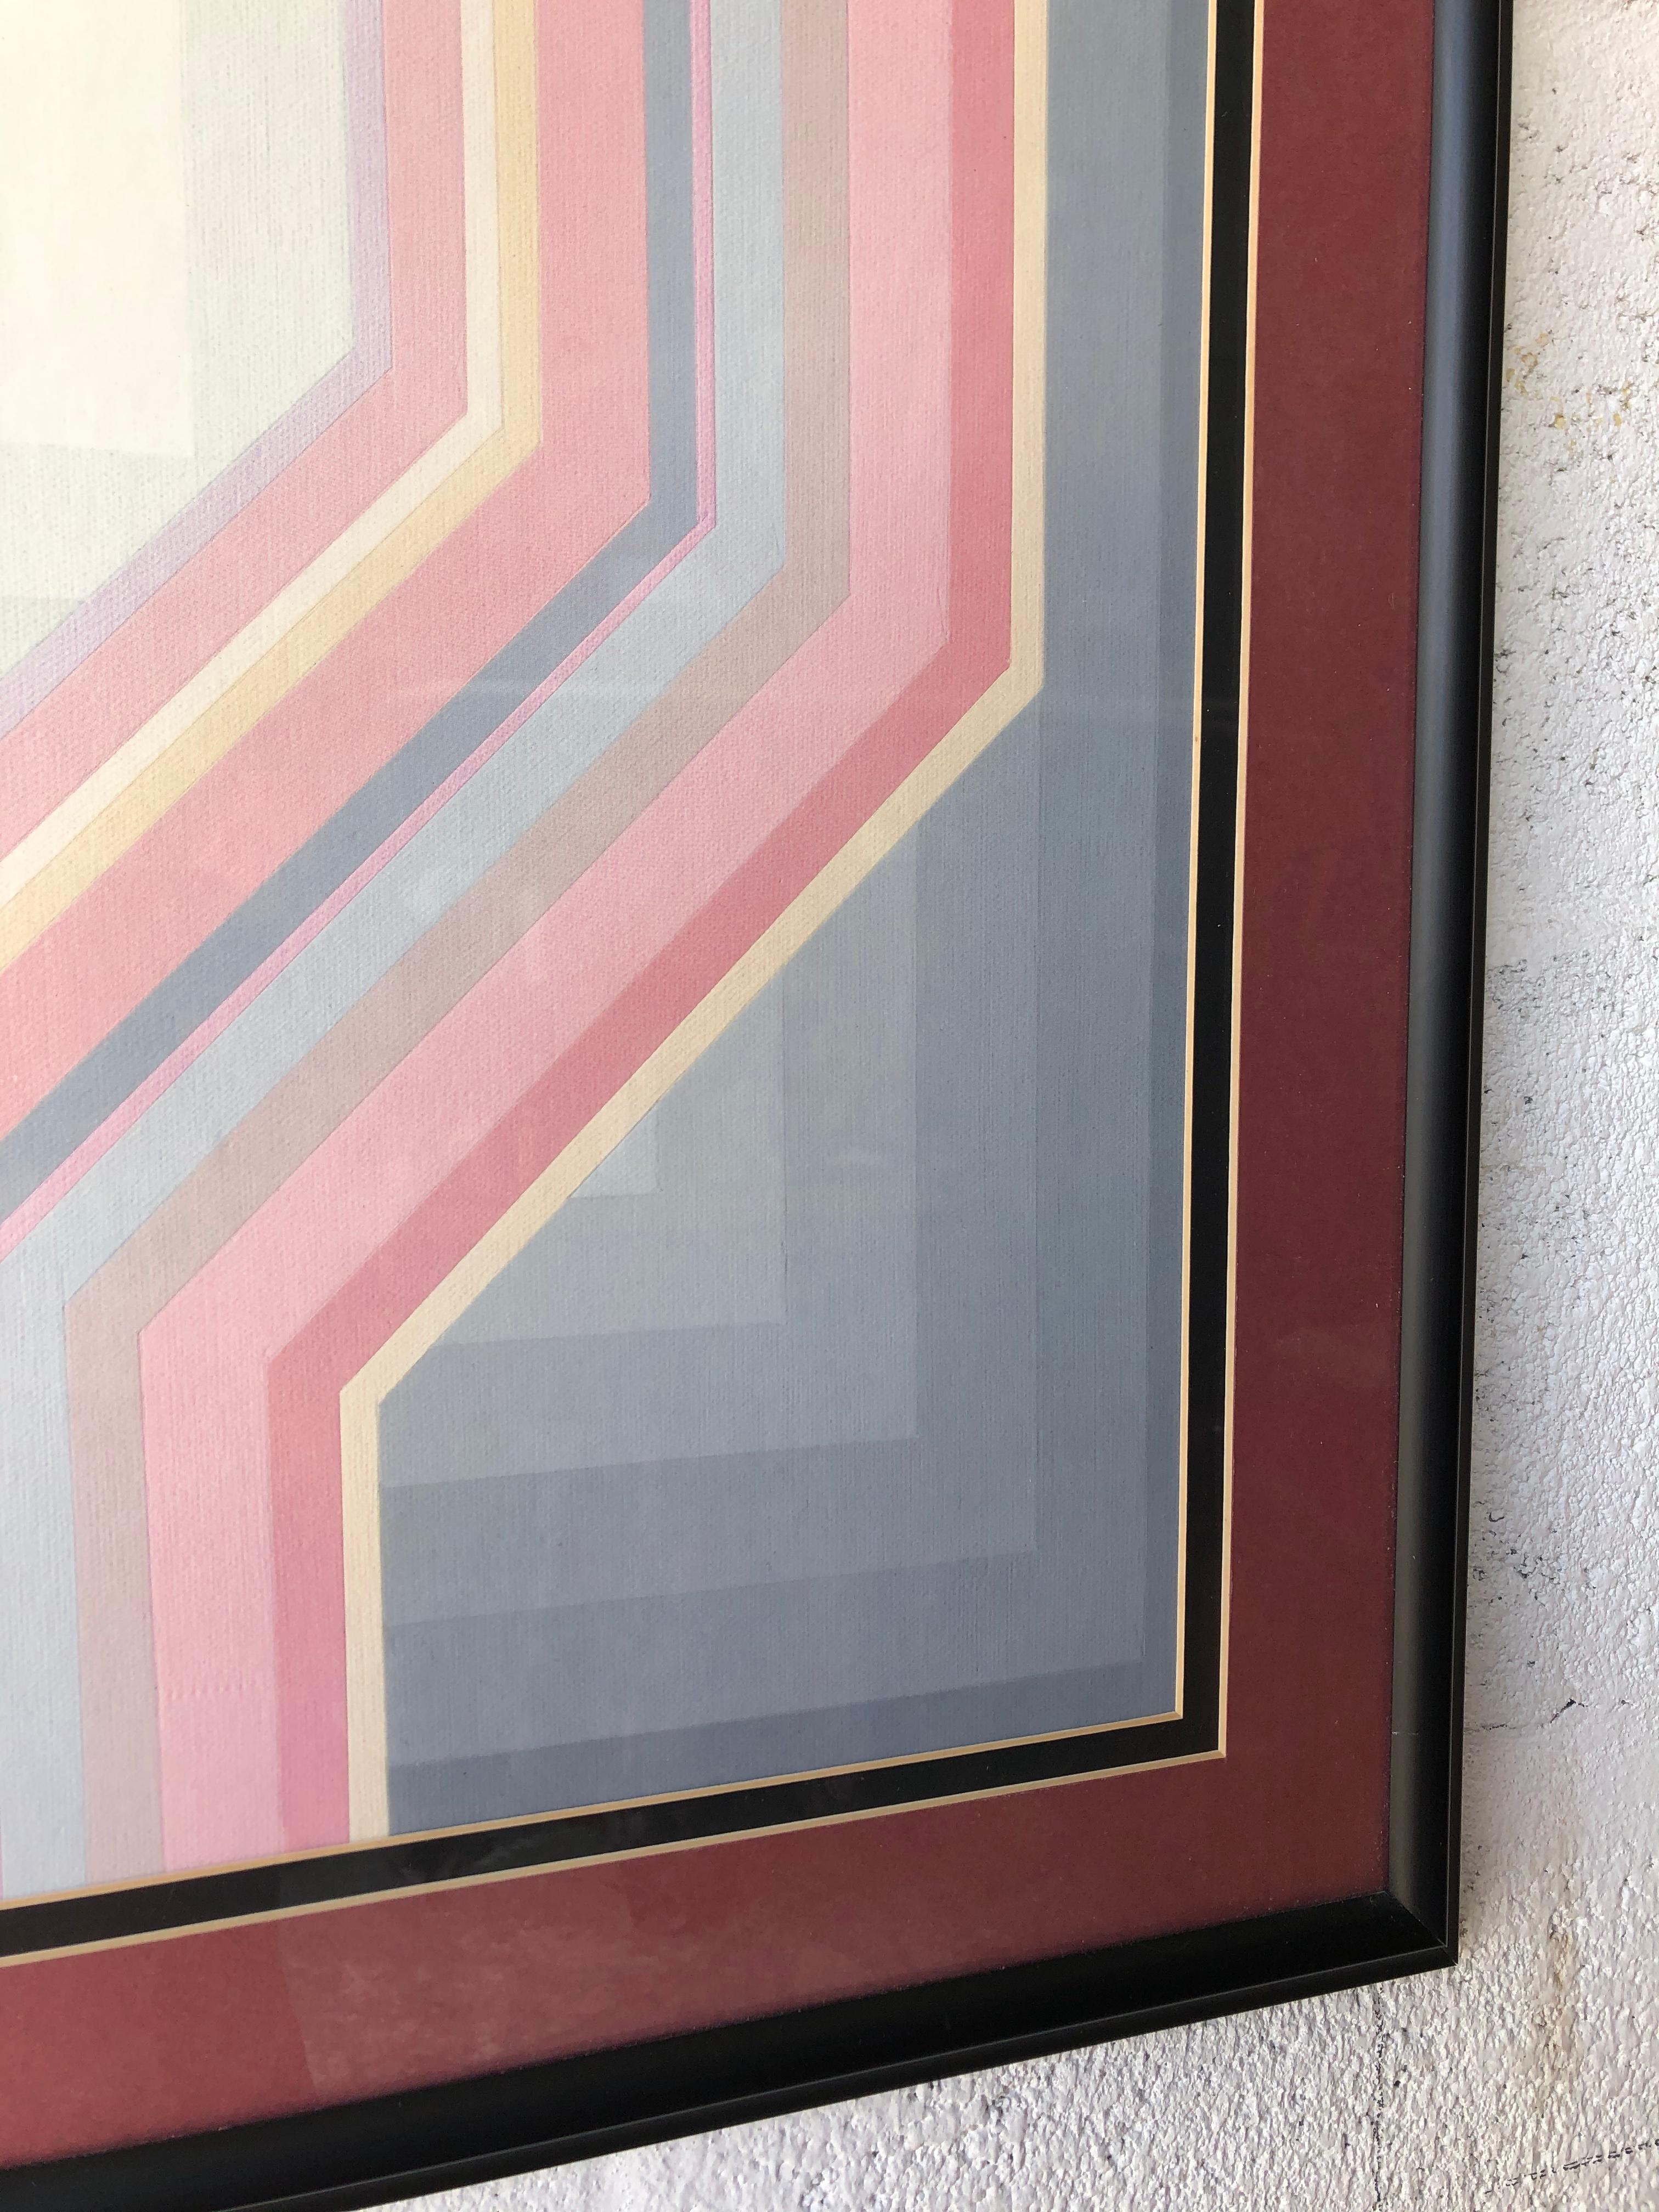 Framed Geometric Op Art Lithograph in the Richard Anuszkiewicz's Style. C 1980s For Sale 2